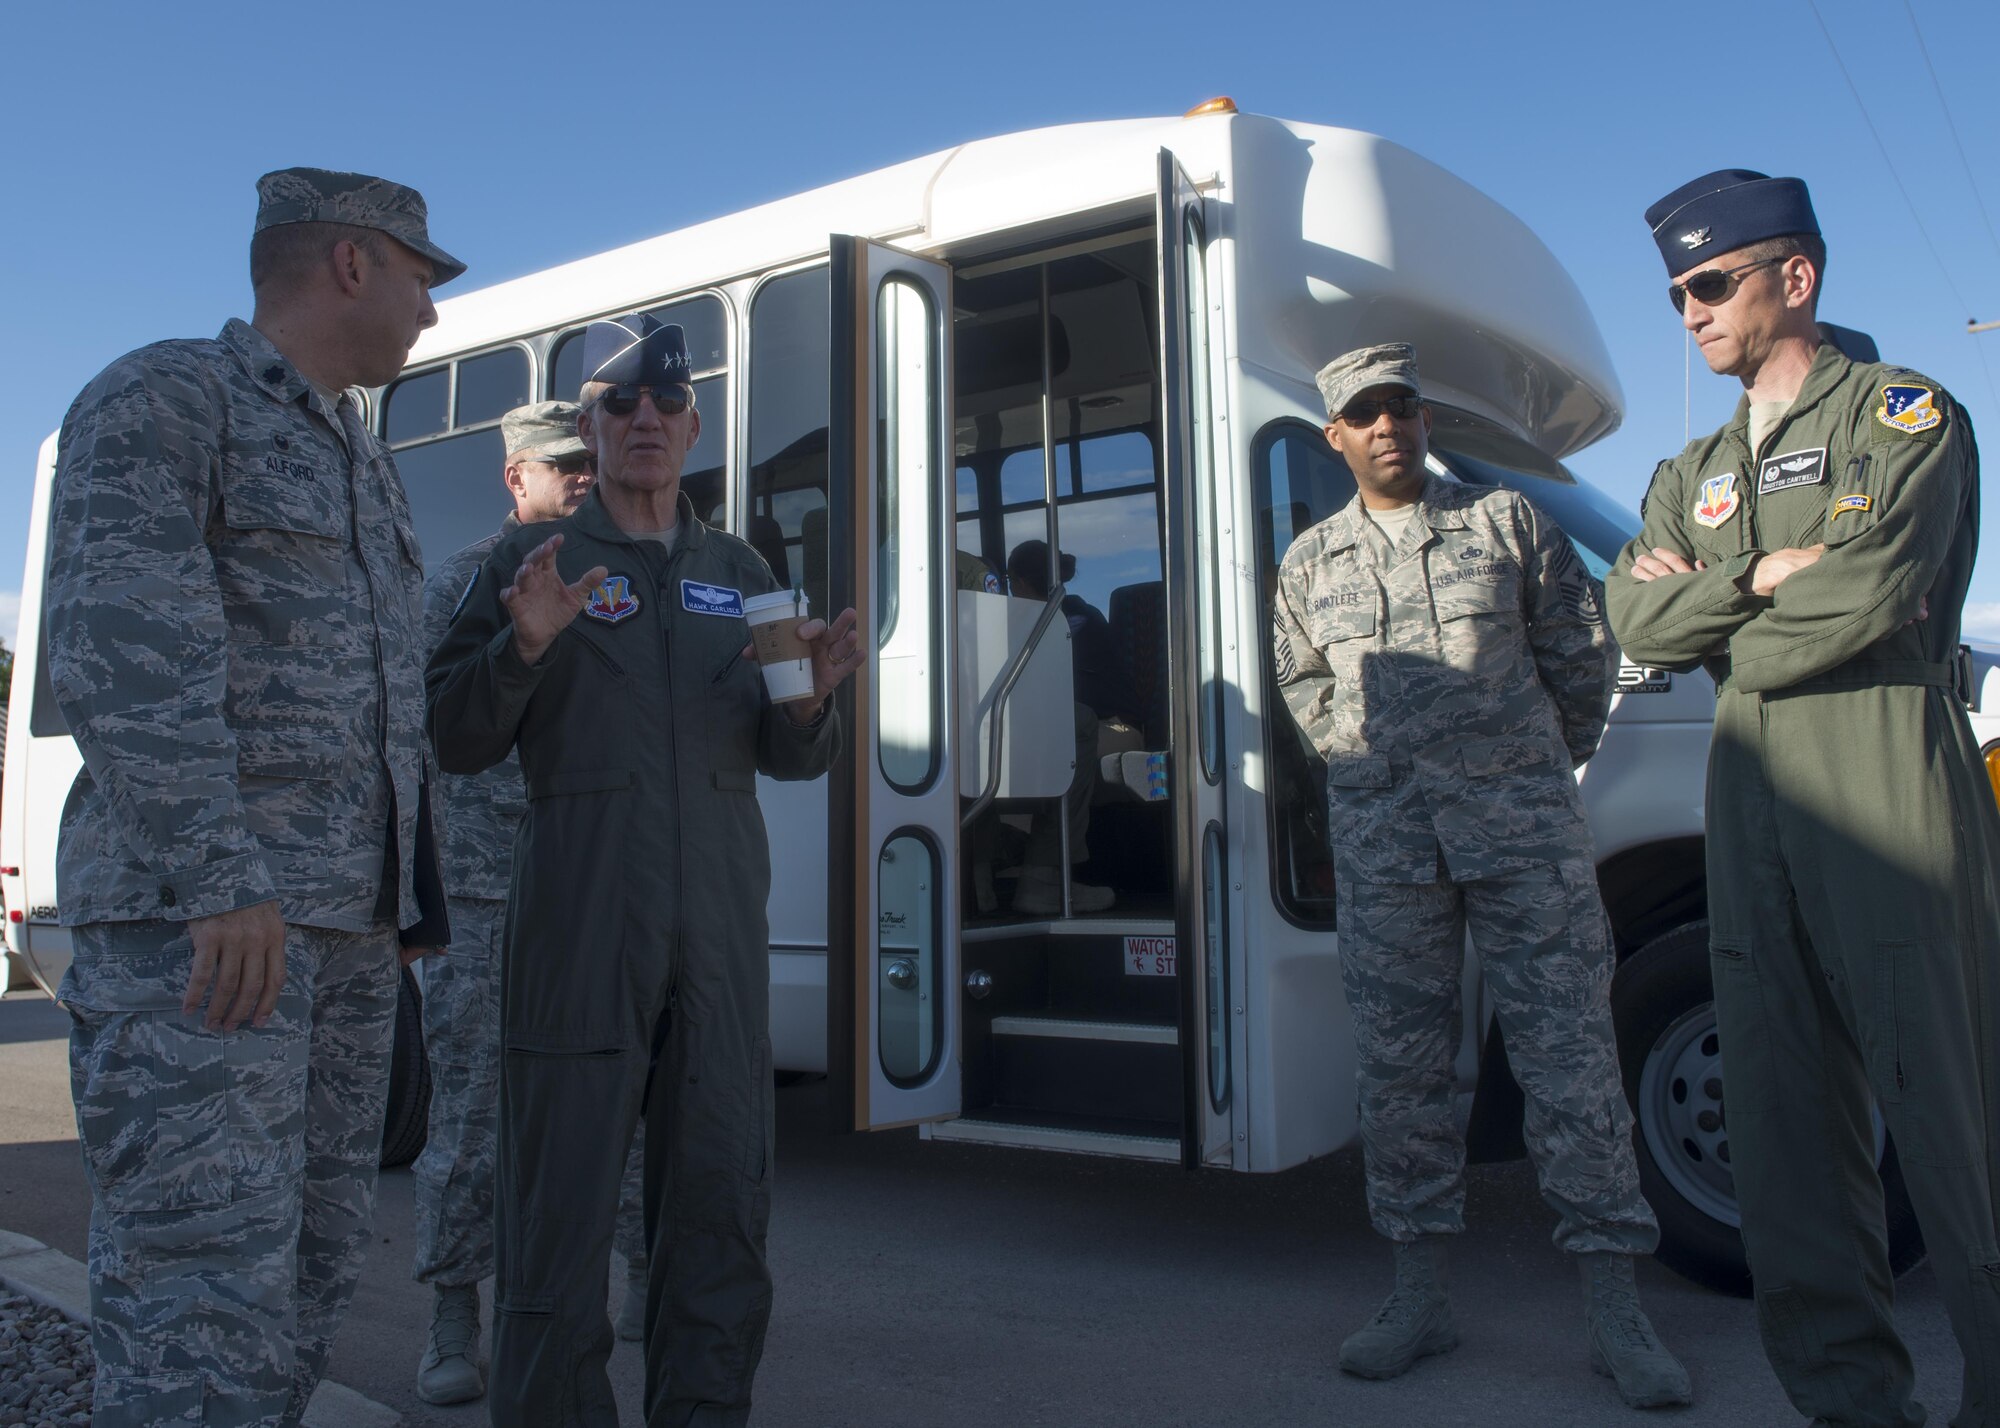 Gen. Hawk Carlisle (left center), the commander of Air Combat Command, discusses progress of the new 49th Medical Group facility with Holloman leadership at Holloman Air Force Base, N.M. Aug. 4, 2016. Carlisle visited Holloman to hold an all-call, conduct a round-table discussion with Holloman leadership, and recognize superior performers at various work centers. (U.S. Air Force photo by Staff Sgt. E’Lysia A. Wray)